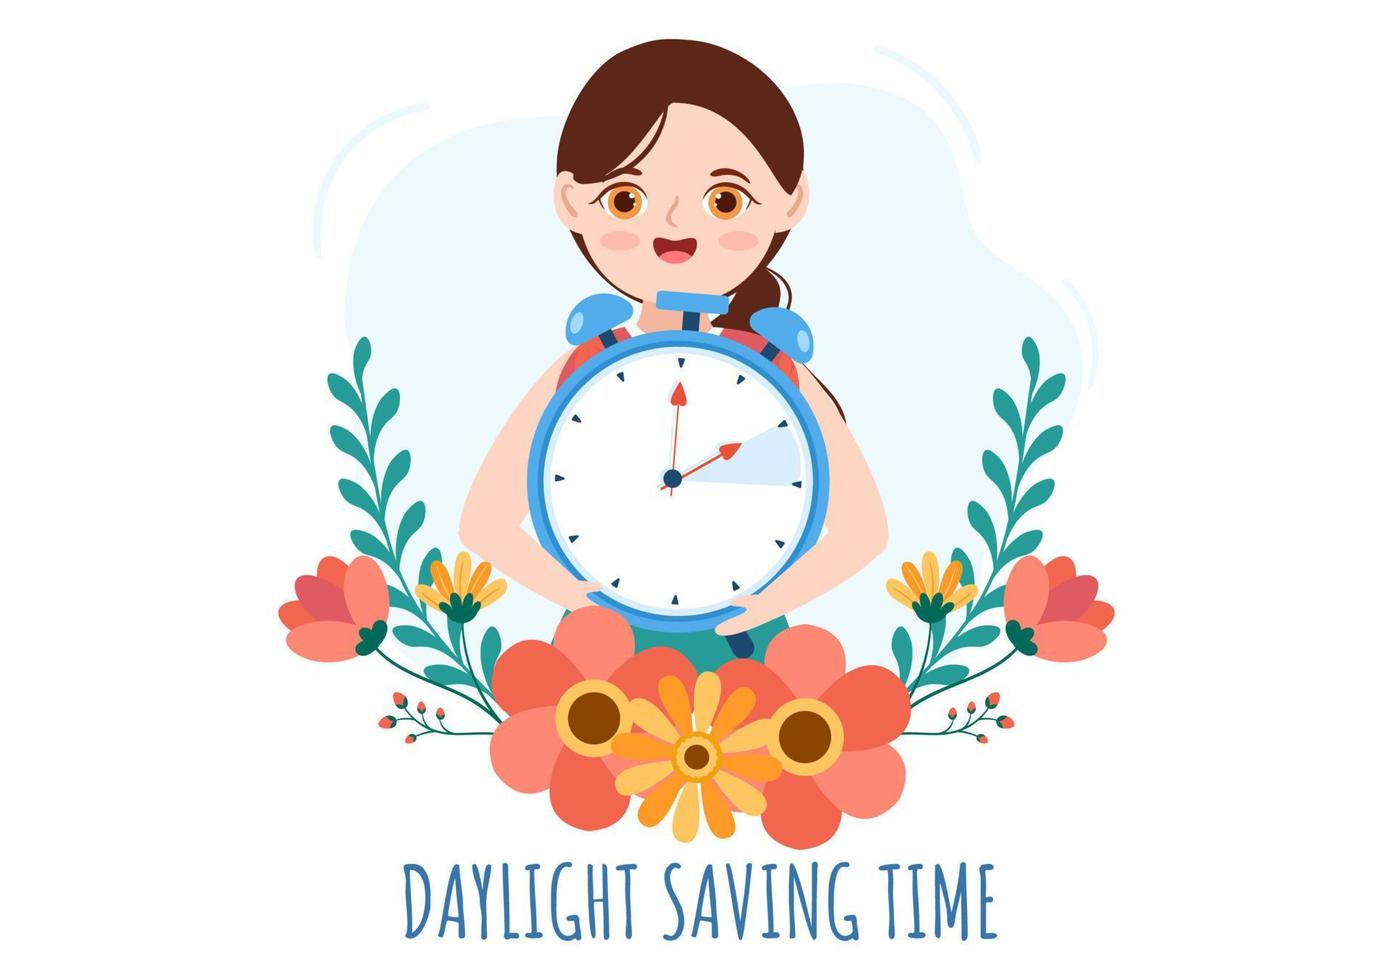 Daylight Savings Time Hand Drawn Flat Cartoon Illustration with Alarm Clock or Calendar from Summer to Spring Forward Design vector